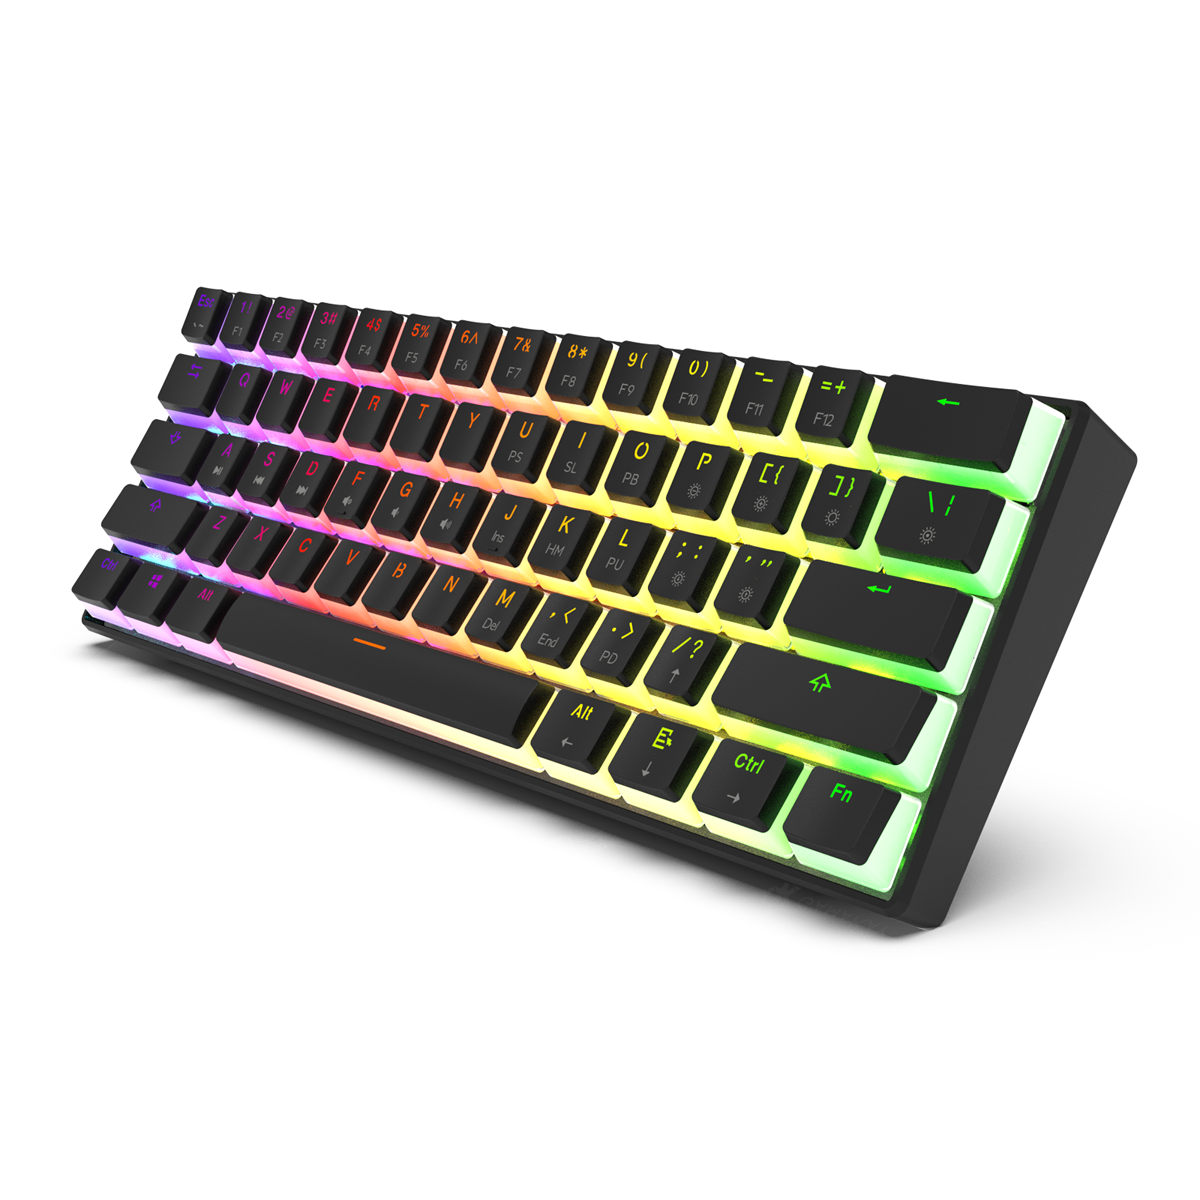 Gamakay MK61 Wired Mechanical Keyboard Gateron Optical Switch Pudding Keycaps RGB 61 Keys Hot Swappable Gaming Keyboard New Version 6